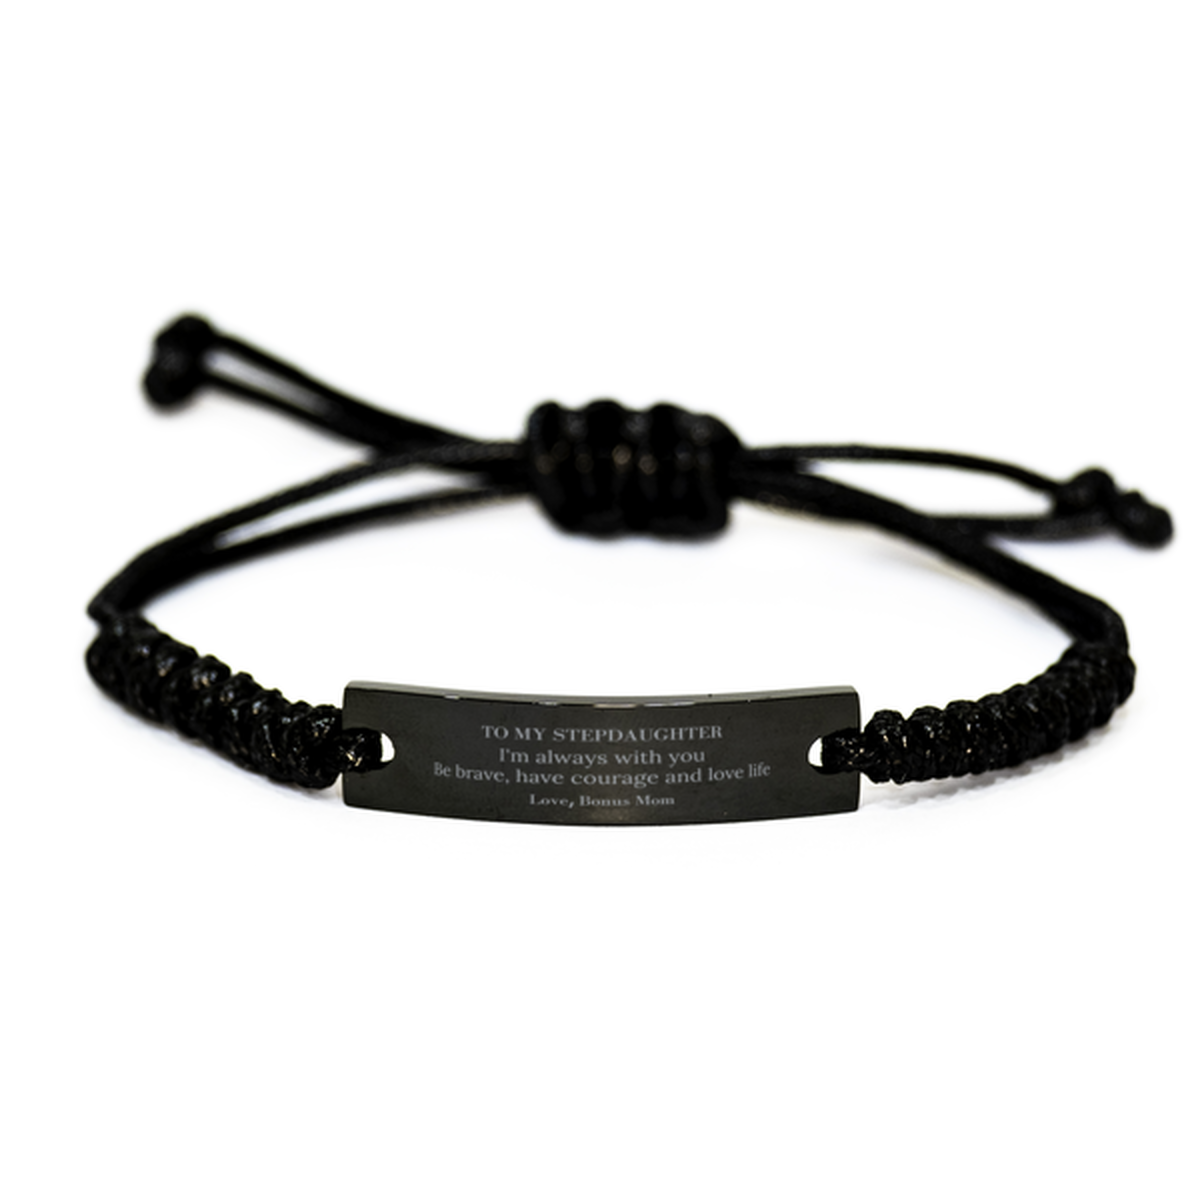 To My Stepdaughter Gifts from Bonus Mom, Unique Black Rope Bracelet Inspirational Christmas Birthday Graduation Gifts for Stepdaughter I'm always with you. Be brave, have courage and love life. Love, Bonus Mom